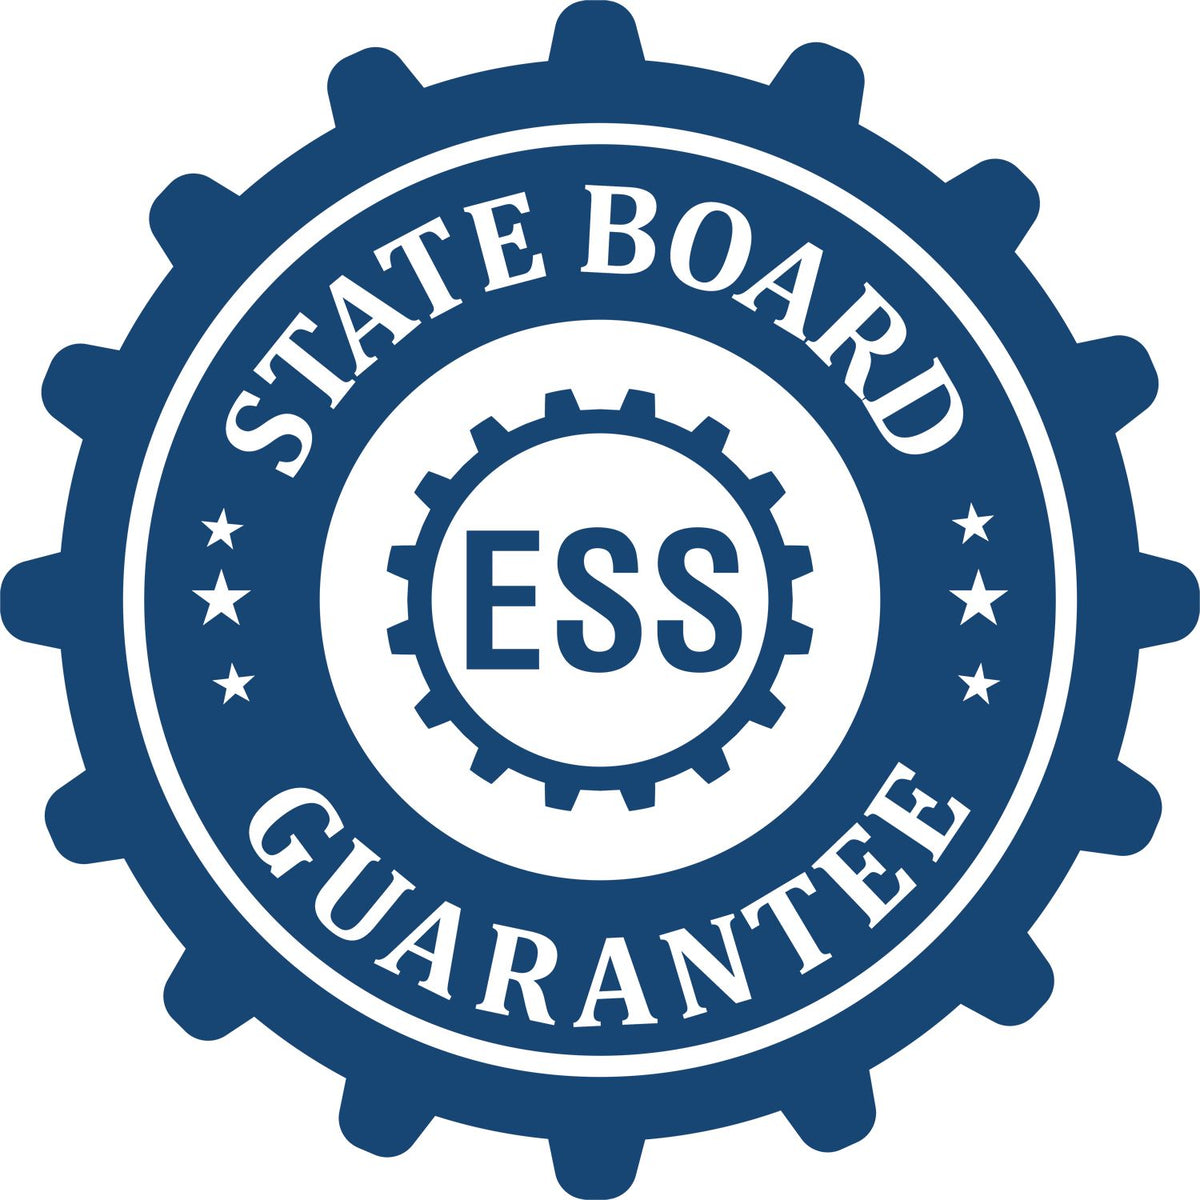 An emblem in a gear shape illustrating a state board guarantee for the Premium MaxLight Pre-Inked Arizona Landscape Architectural Stamp product.